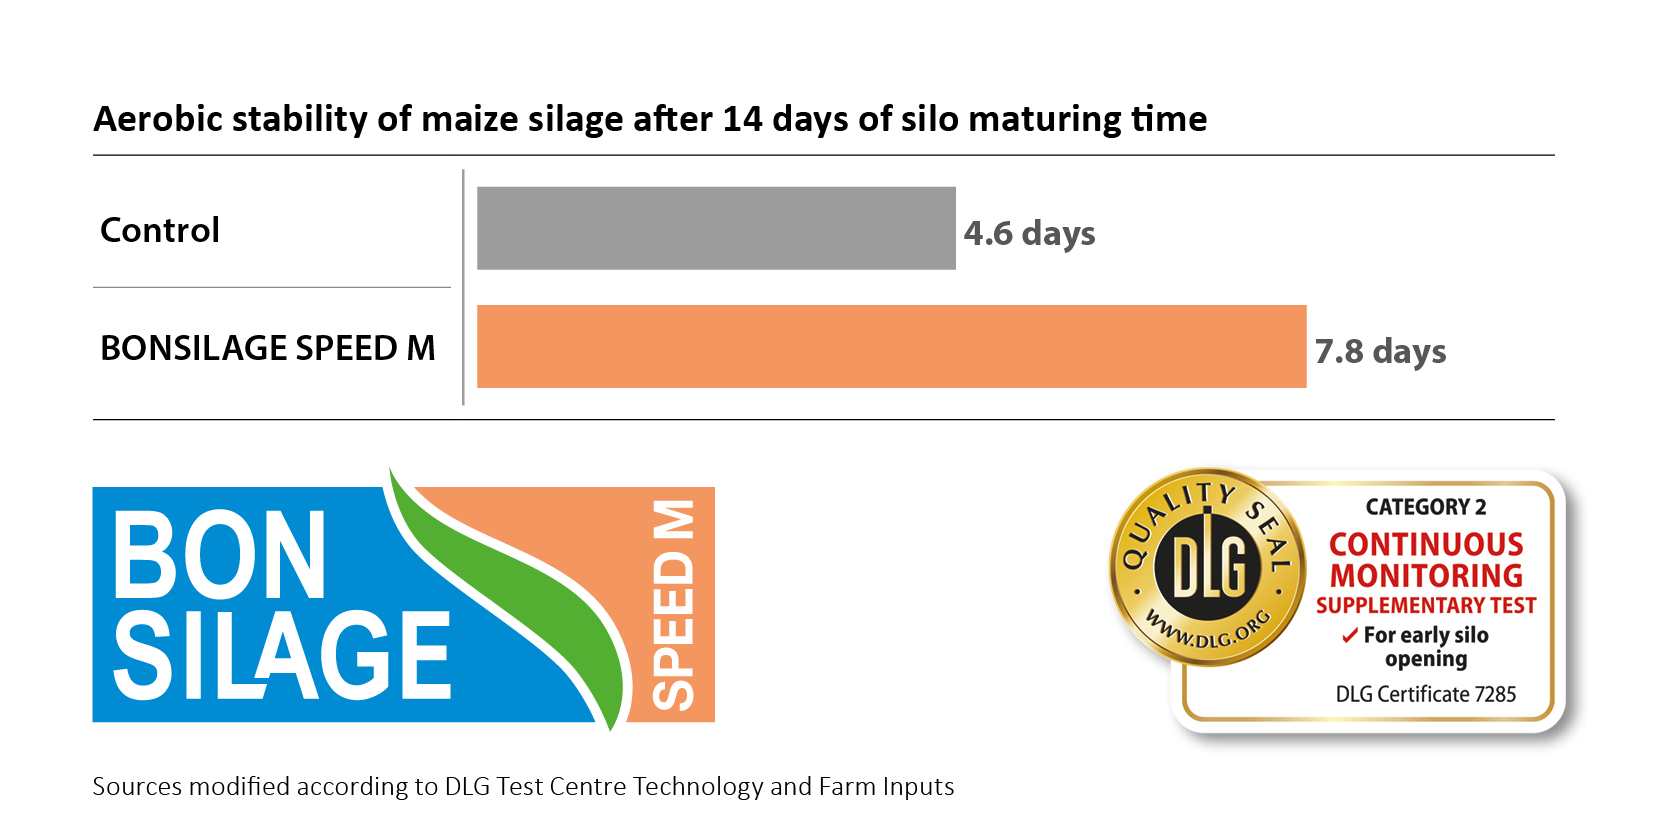 BONSILAGE SPEED M: DLG test result shows longer aerobic stability after 14 days of silage maturation